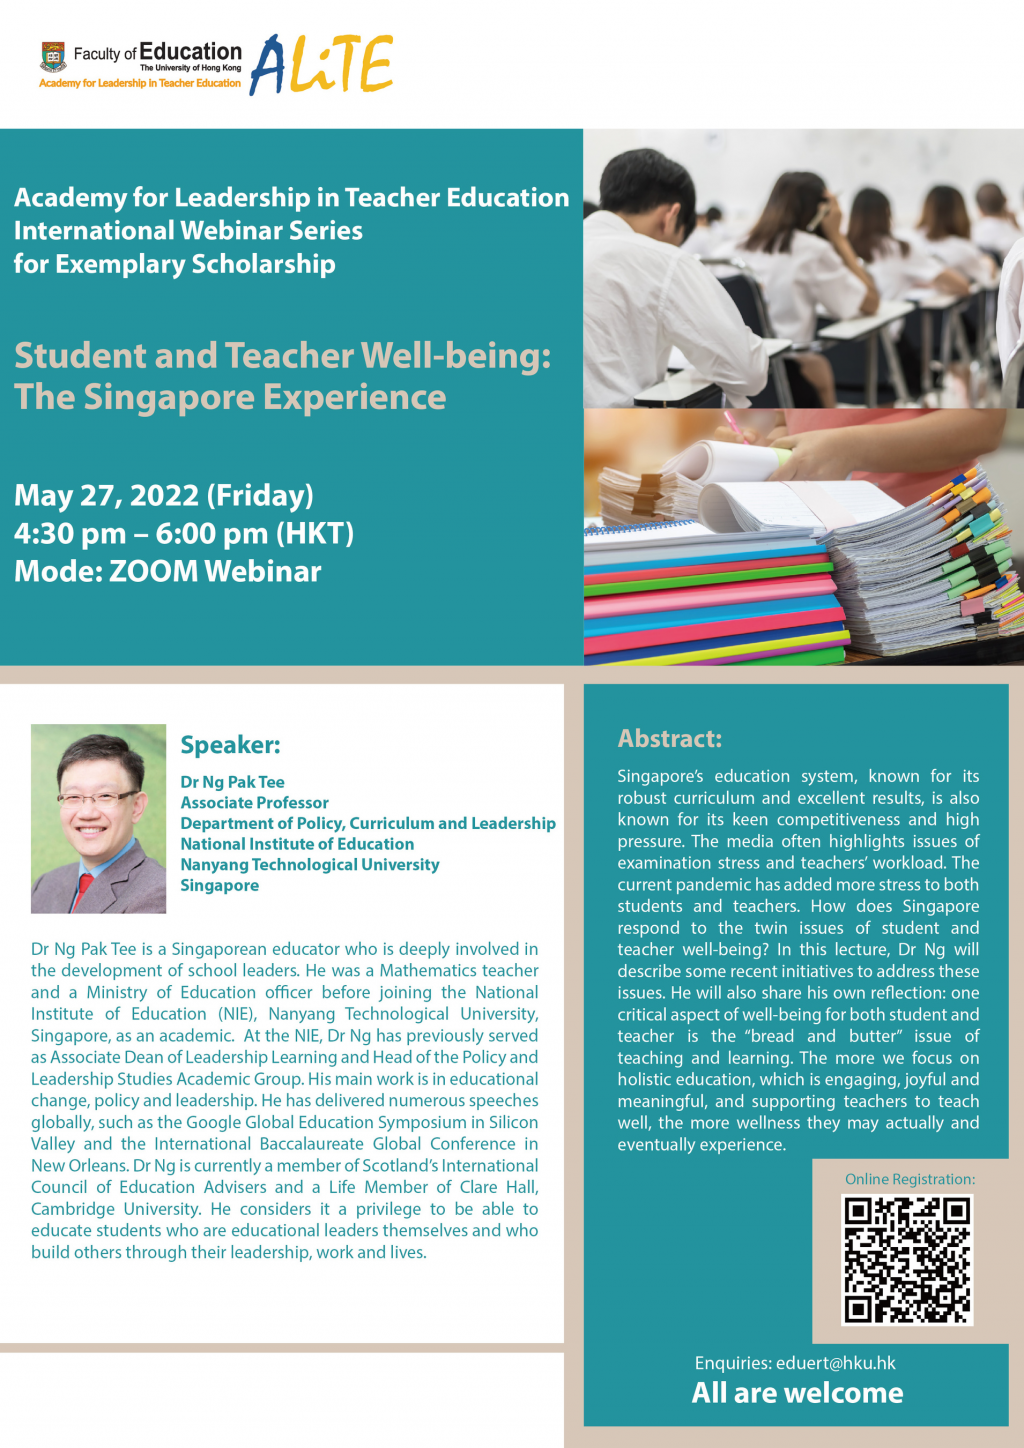 Student and Teacher Well-being: The Singapore Experience - Webinar by Dr Ng Pak Tee, Nanyang Technological University, Singapore